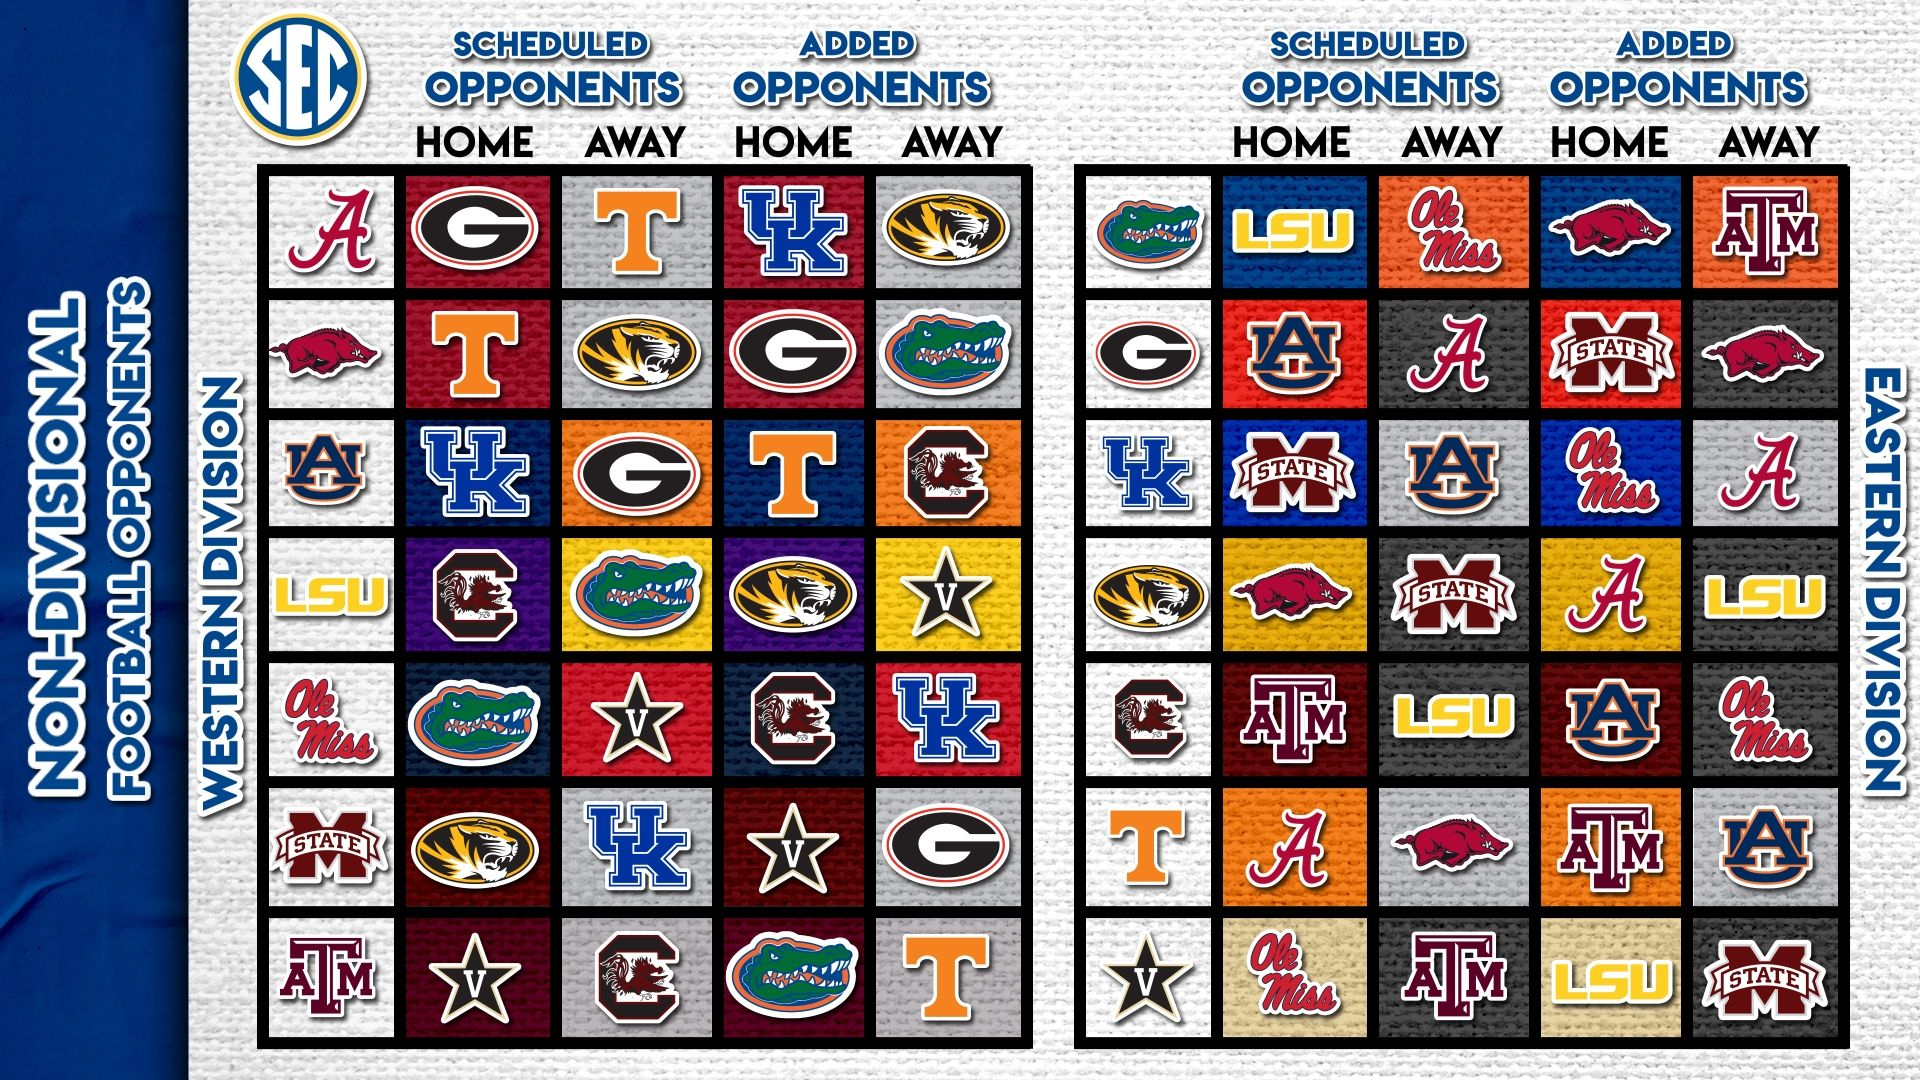 New Sec Opponents Set For Revised Football Schedule